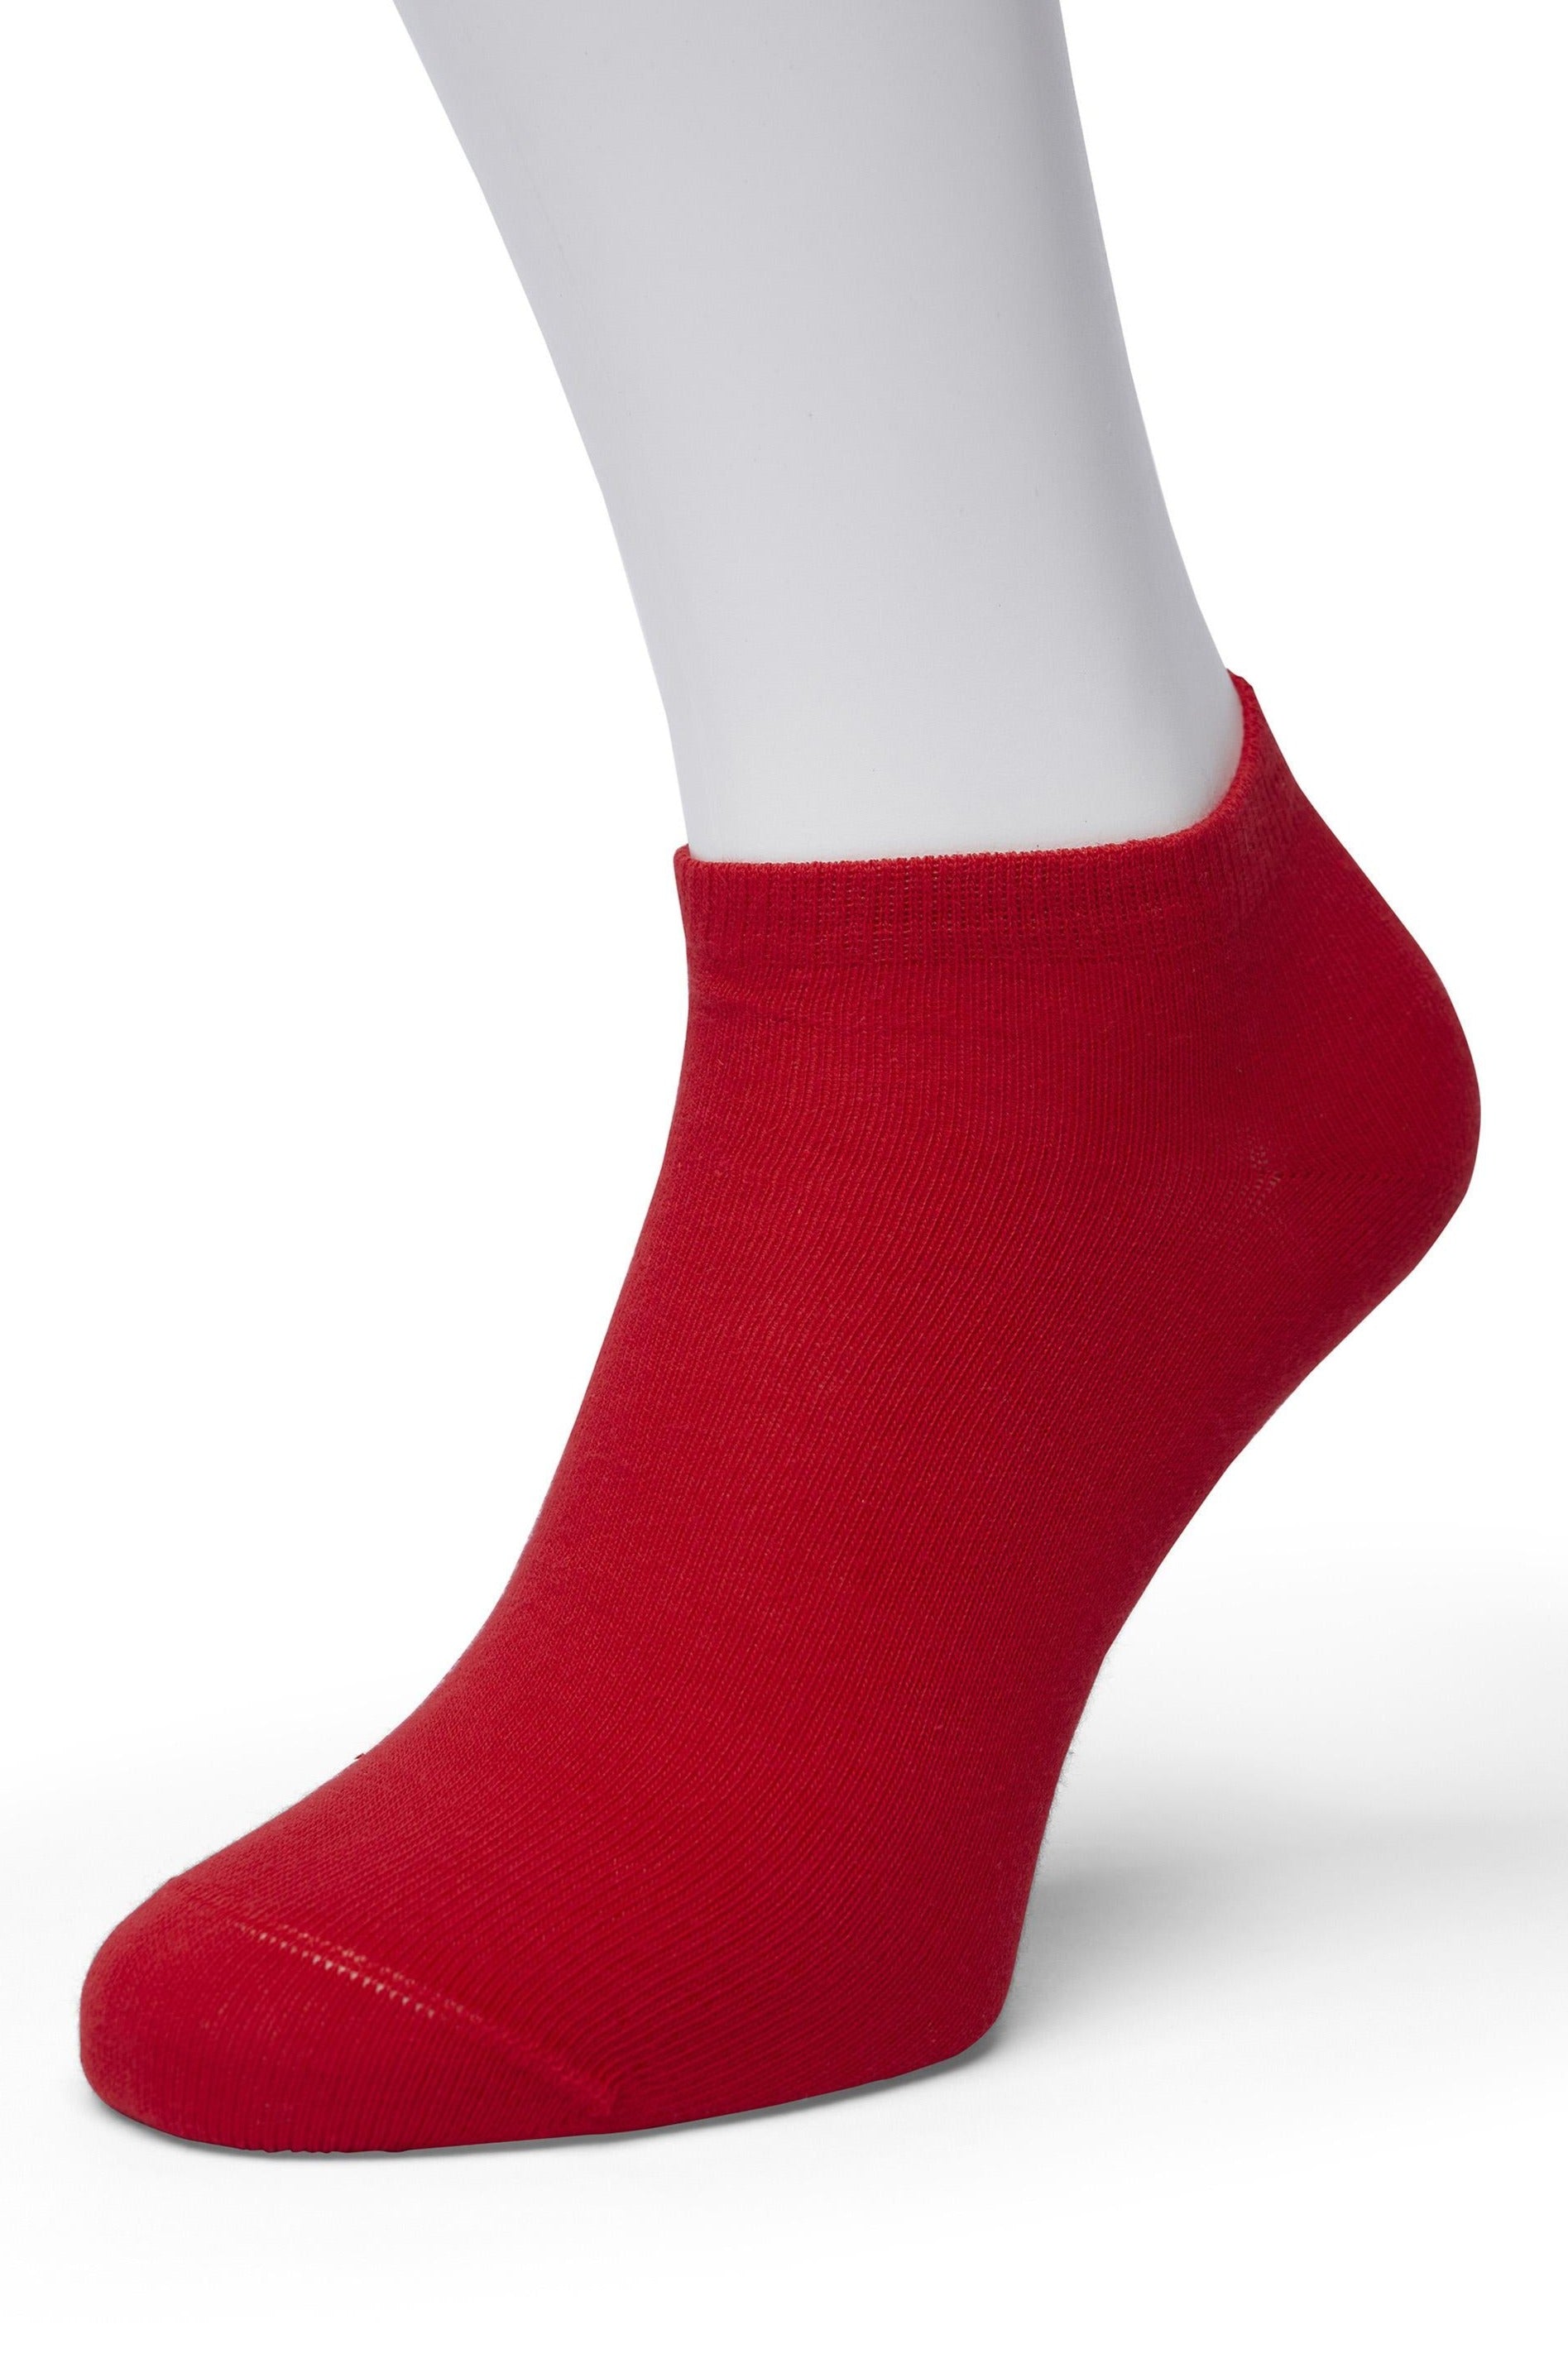 Bonnie Doon BD811001 Cotton Short Ankle Sock - Red (sand) Low rise cotton mix socks with flat toe seam and plain elasticated cuff. 